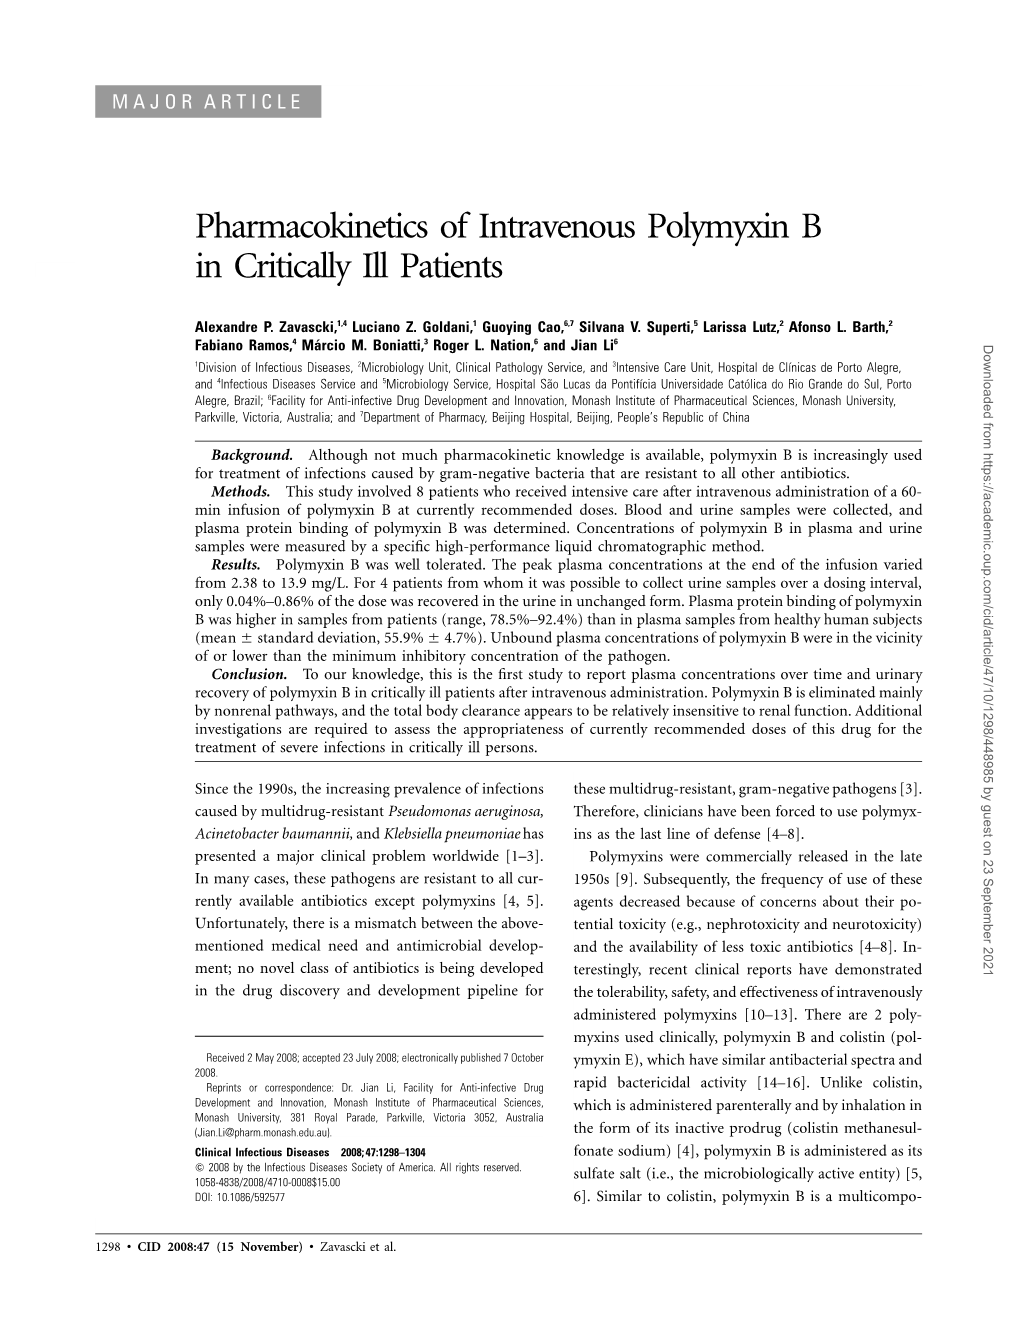 Pharmacokinetics of Intravenous Polymyxin B in Critically Ill Patients